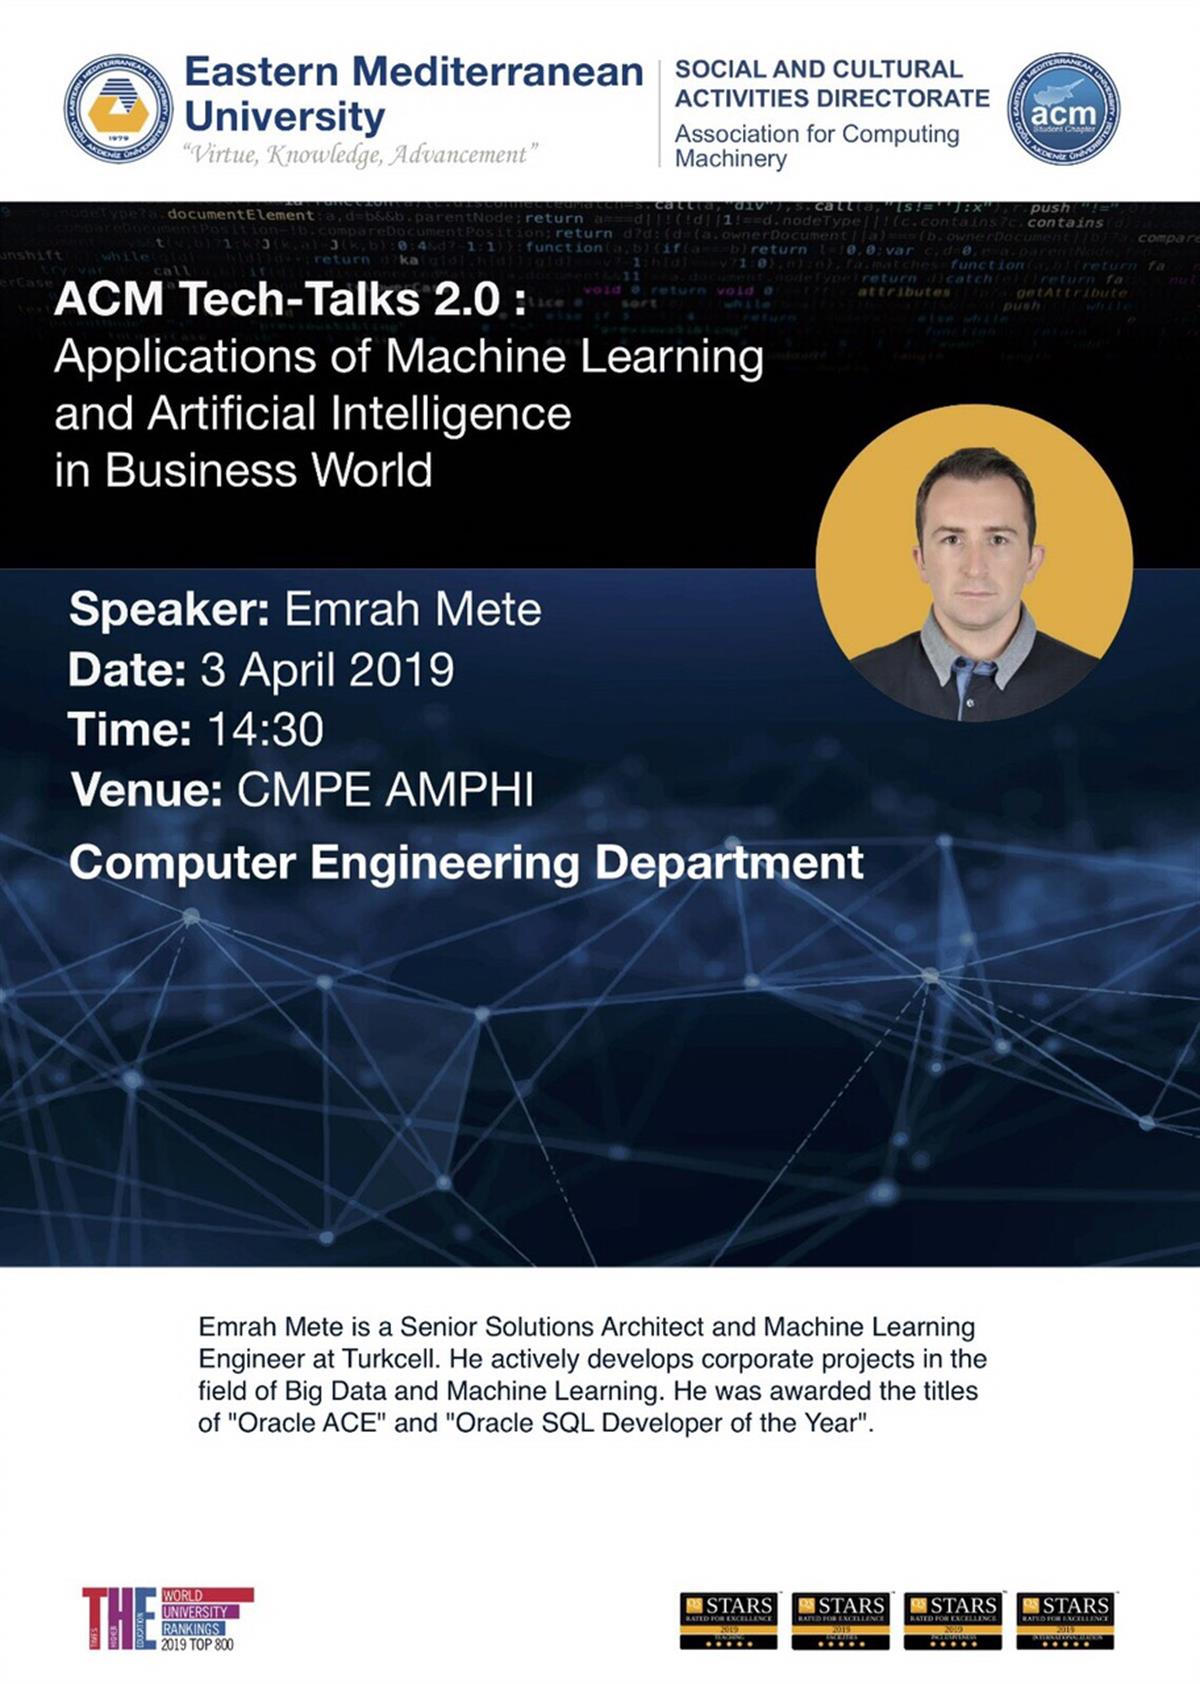 ACM Tech-Talks 2.0 : Application of Machine Learning and Artificial Intelligence in Business World. Speaker: Emrah Mete Time:14:30 